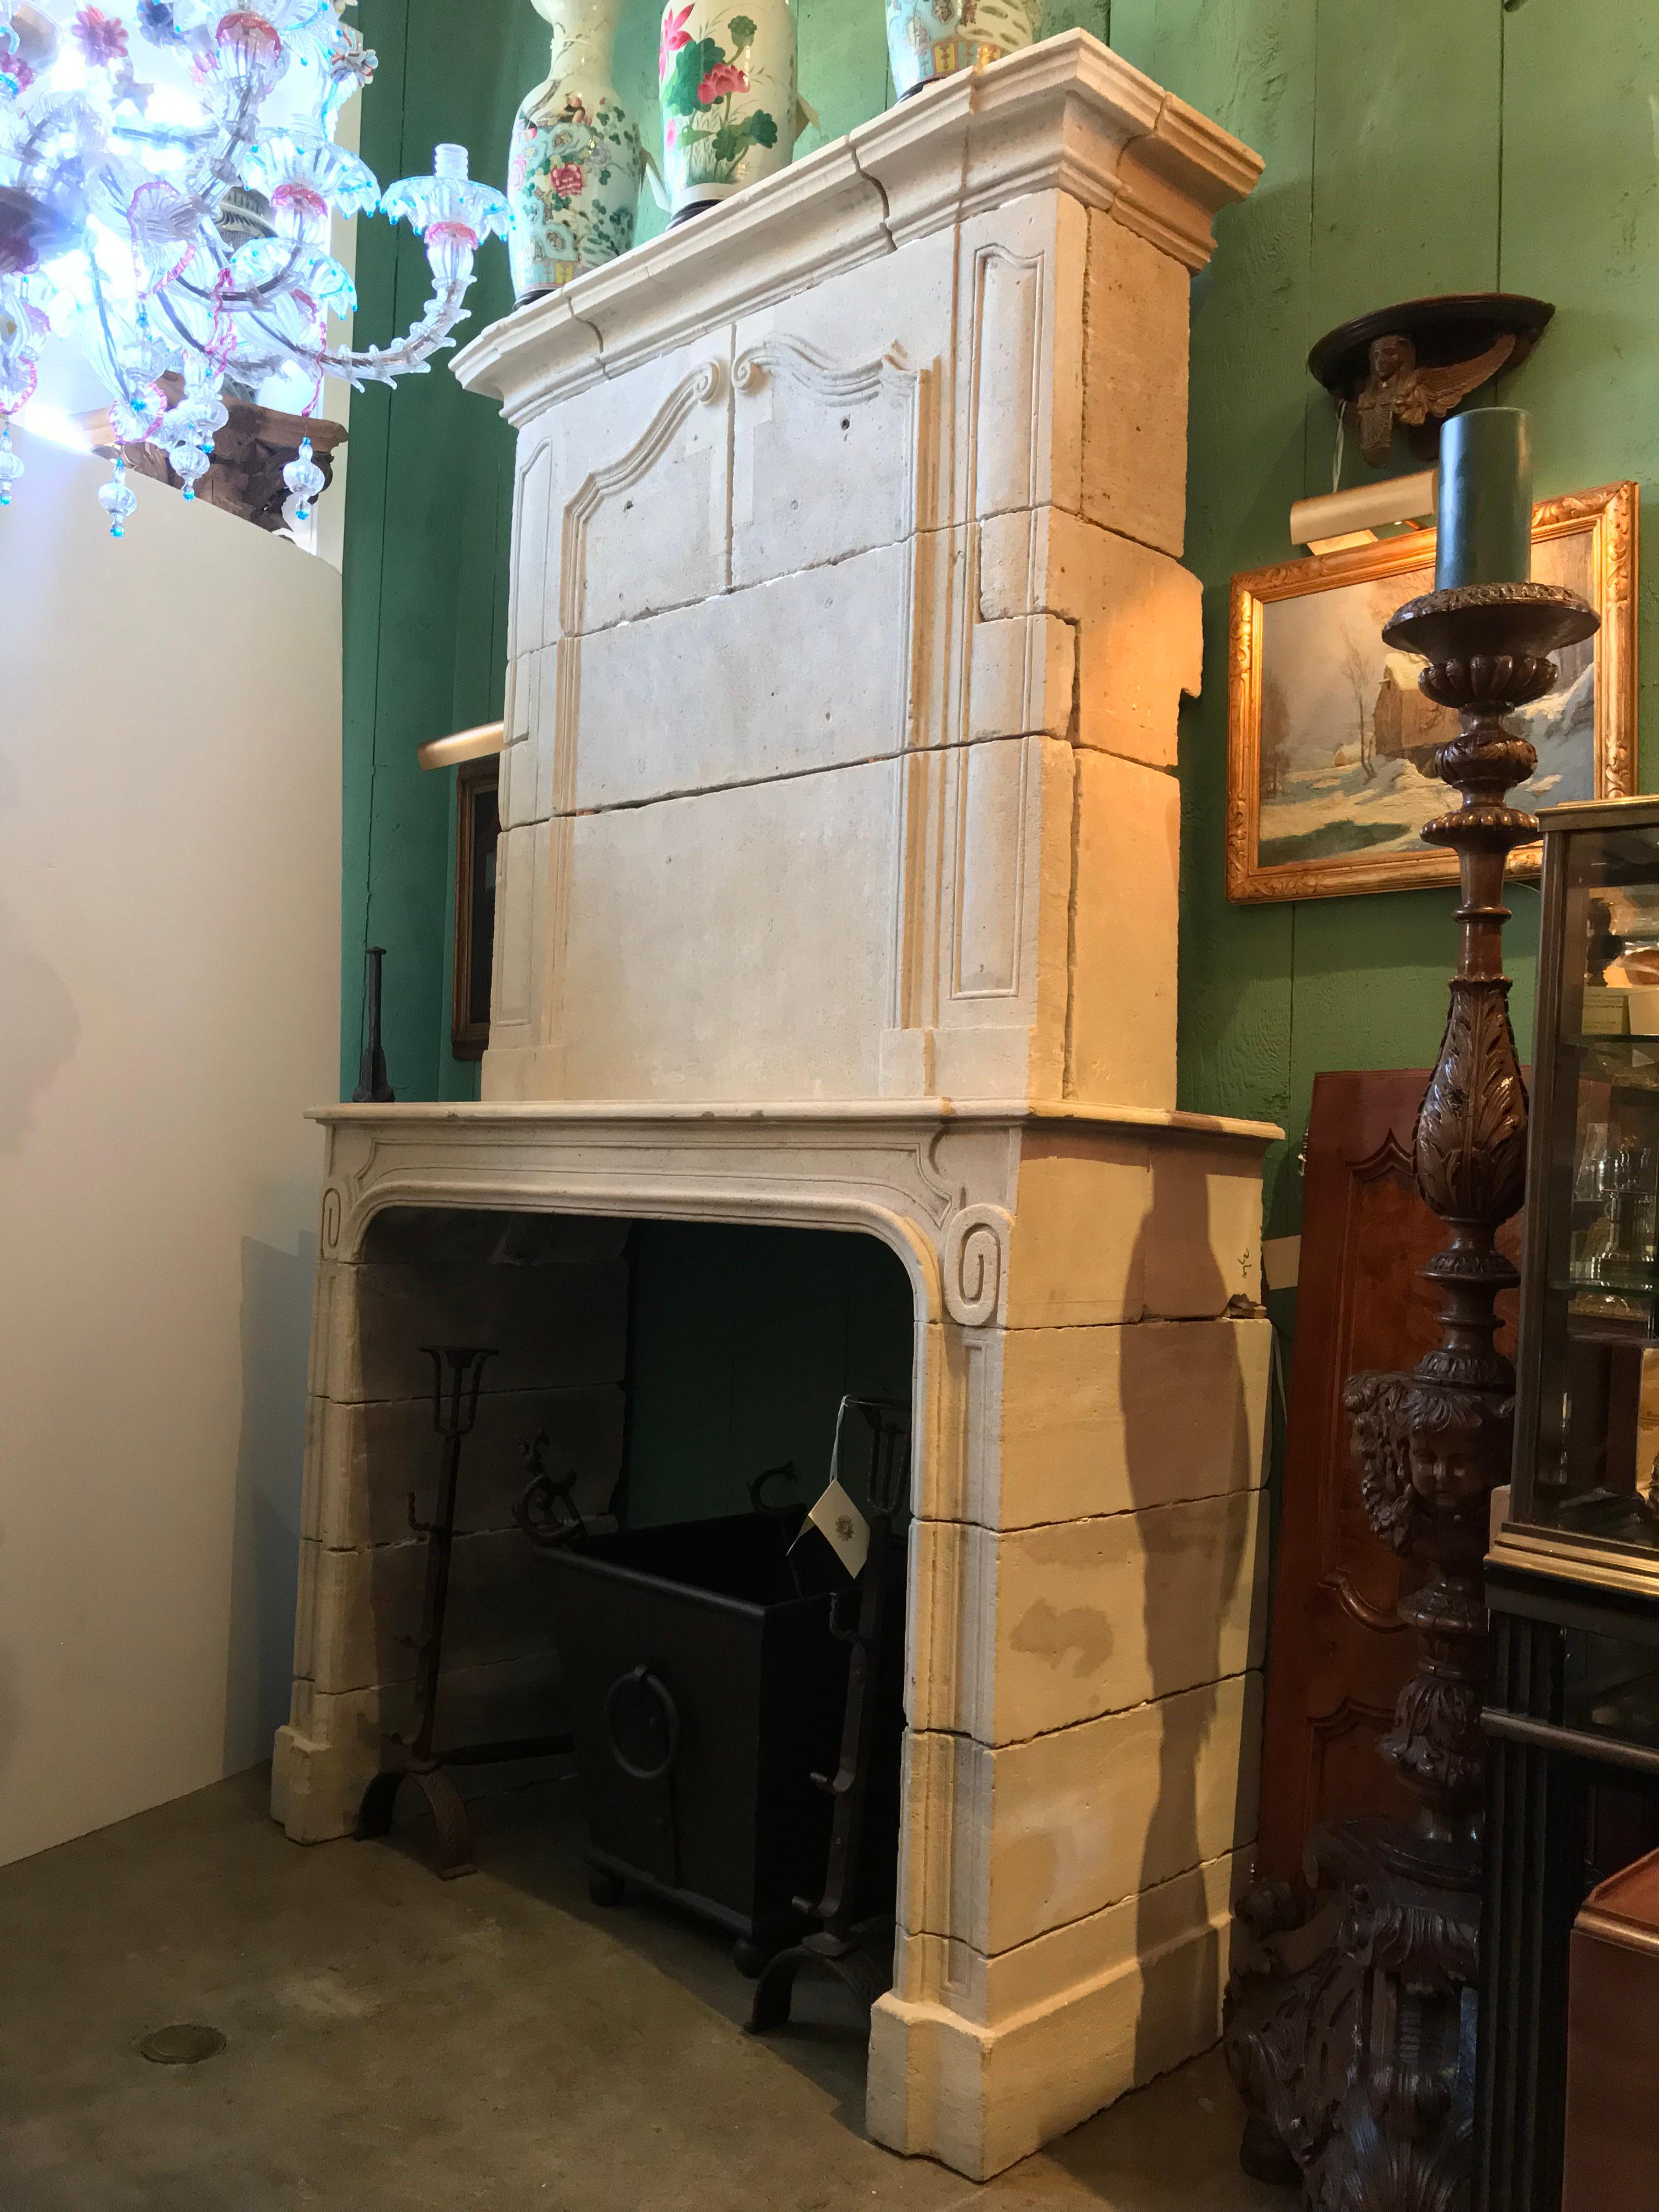 Rare and unique French antique castle fireplace 18th century period limestone chimney. Chateau.
Perfect for an interior with character, rustic or contemporary pured minimalistic interior design. For outdoor or indoor
Handcrafted from that period in